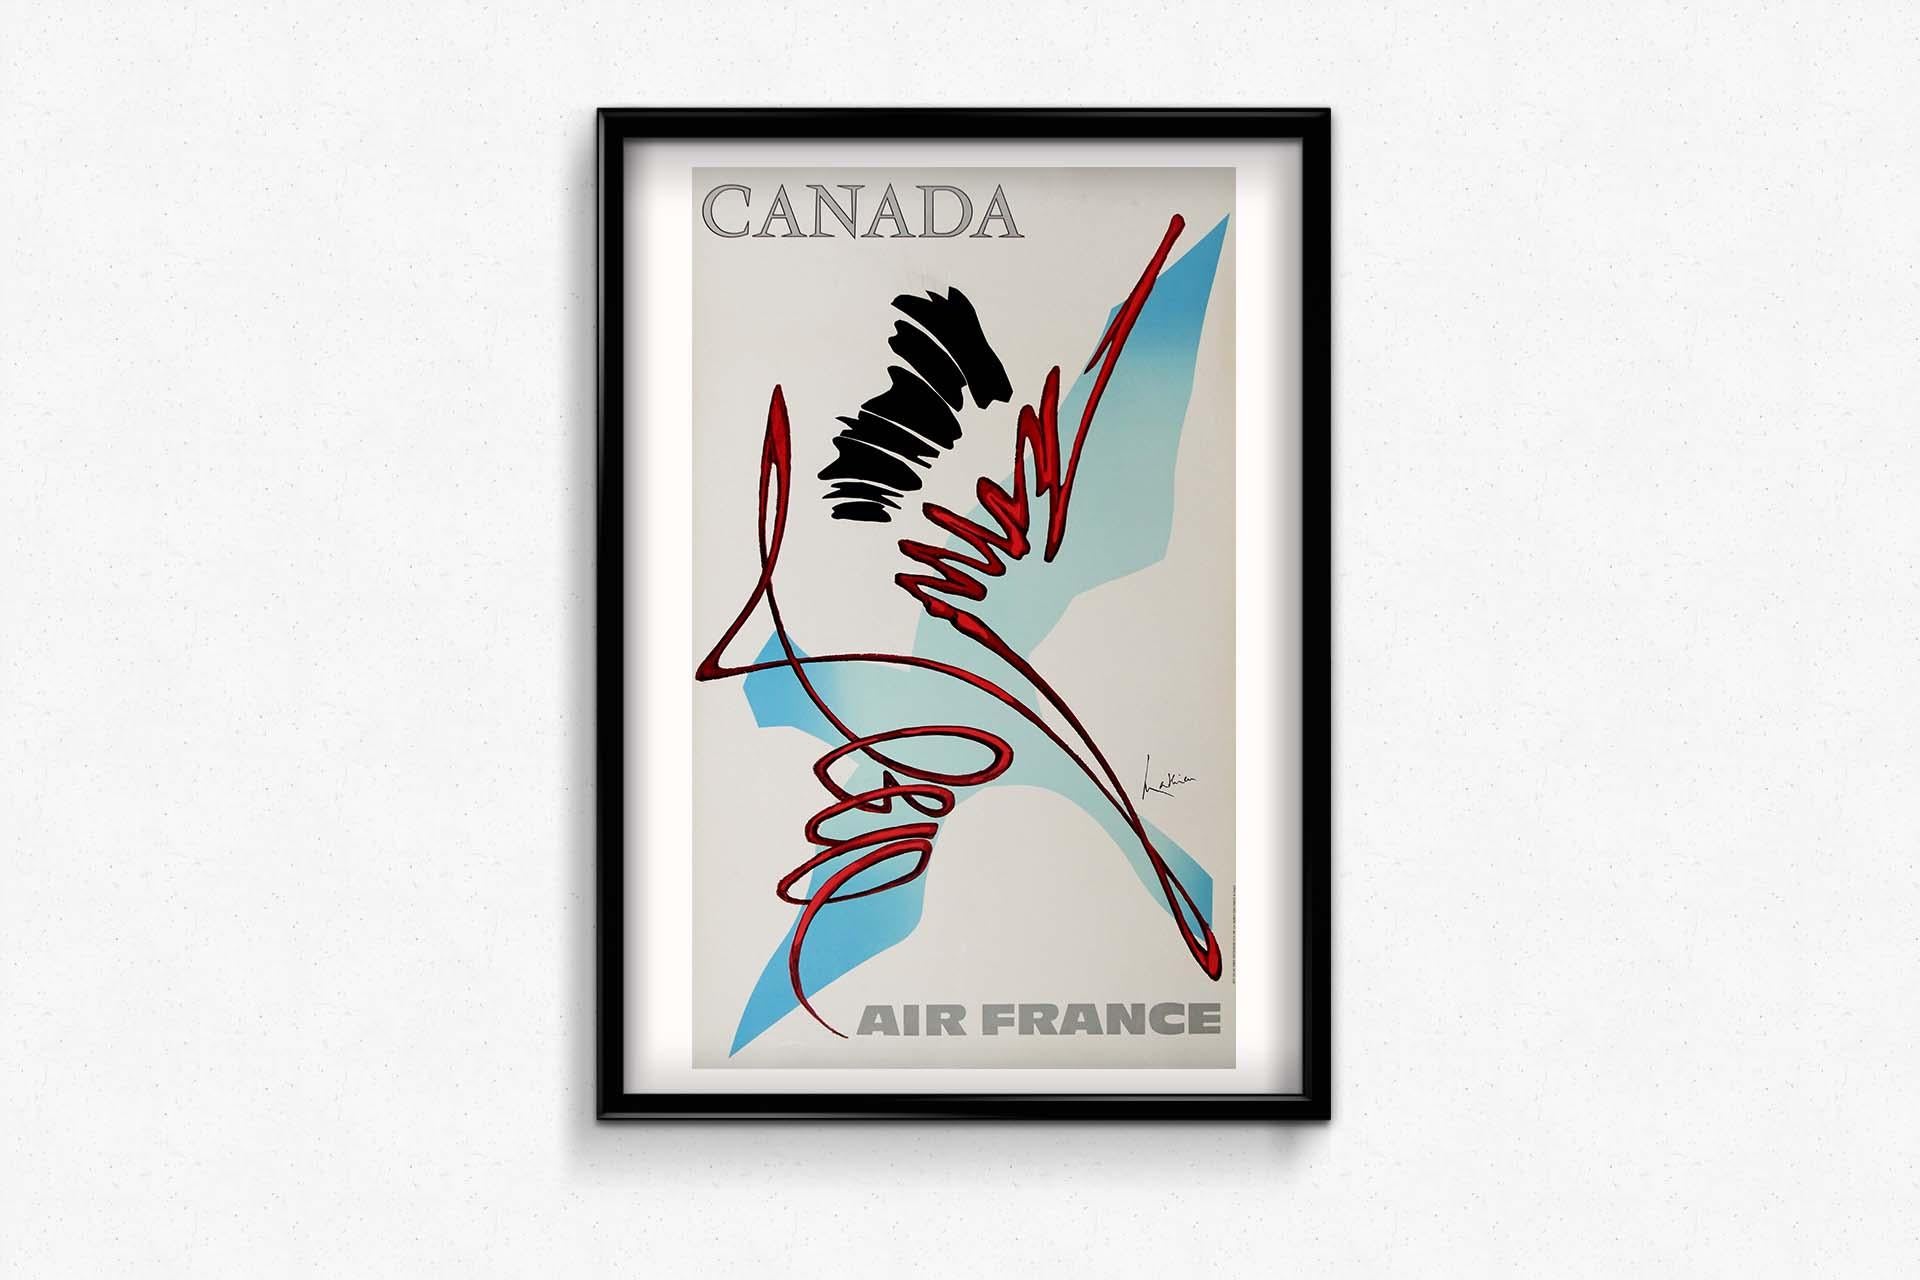 1967 Georges Mathieu original travel poster Air France Canada  For Sale 1